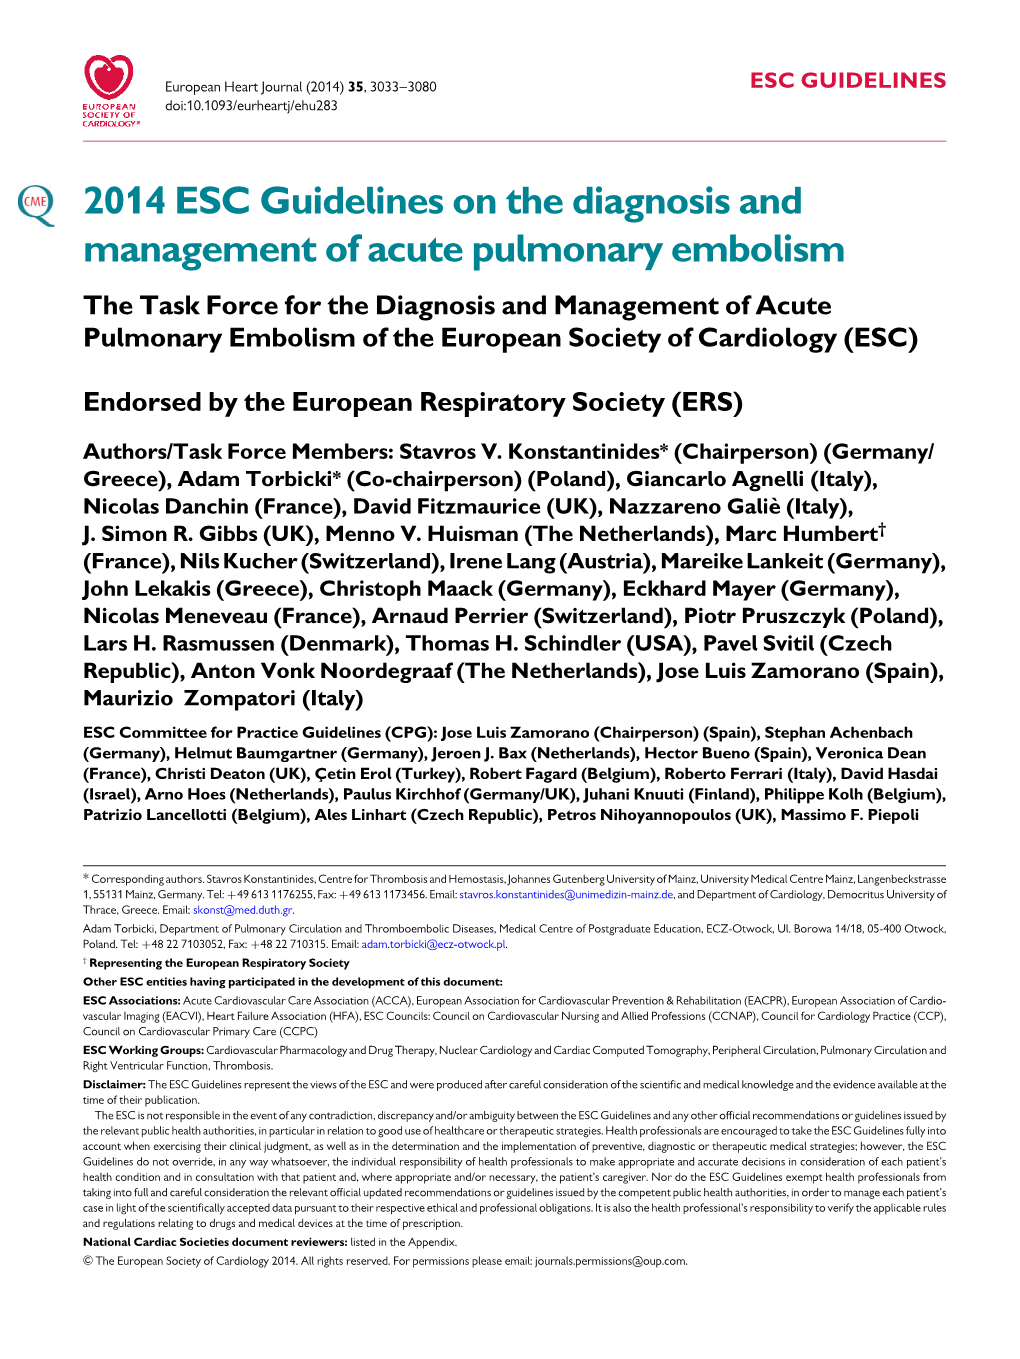 2014 ESC Guidelines on the Diagnosis and Management Of